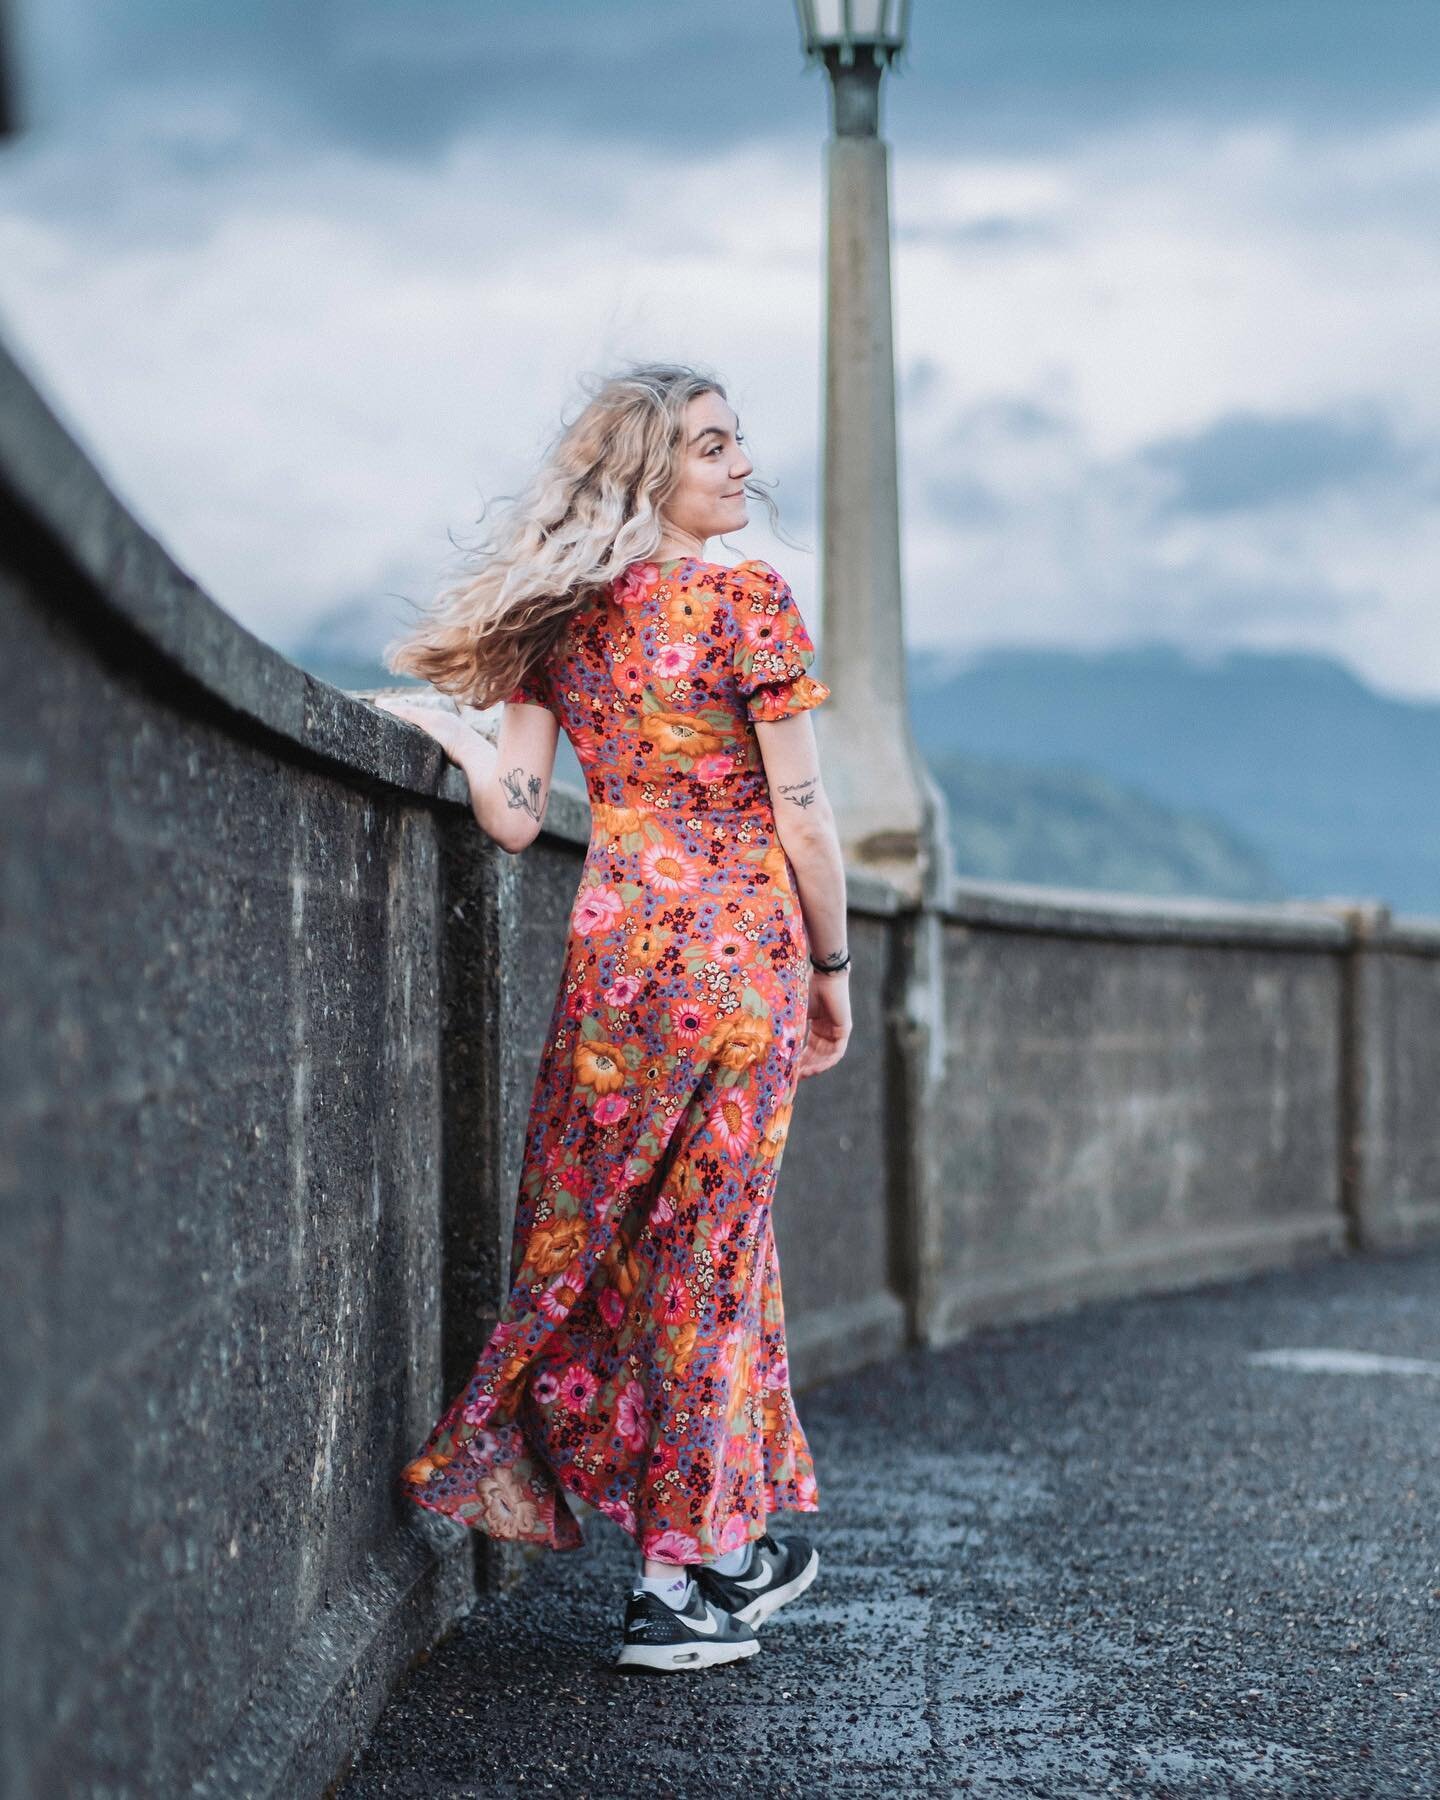 I had so much fun getting to work with @samarafrancisphotography and @terra.uhler on this photoshoot! I can&rsquo;t wait for our next shoot!! 😁

#photoshoot #photography #portrait #portlandphotographers #portraitphotography #pnw #pdx #thegorge #colu